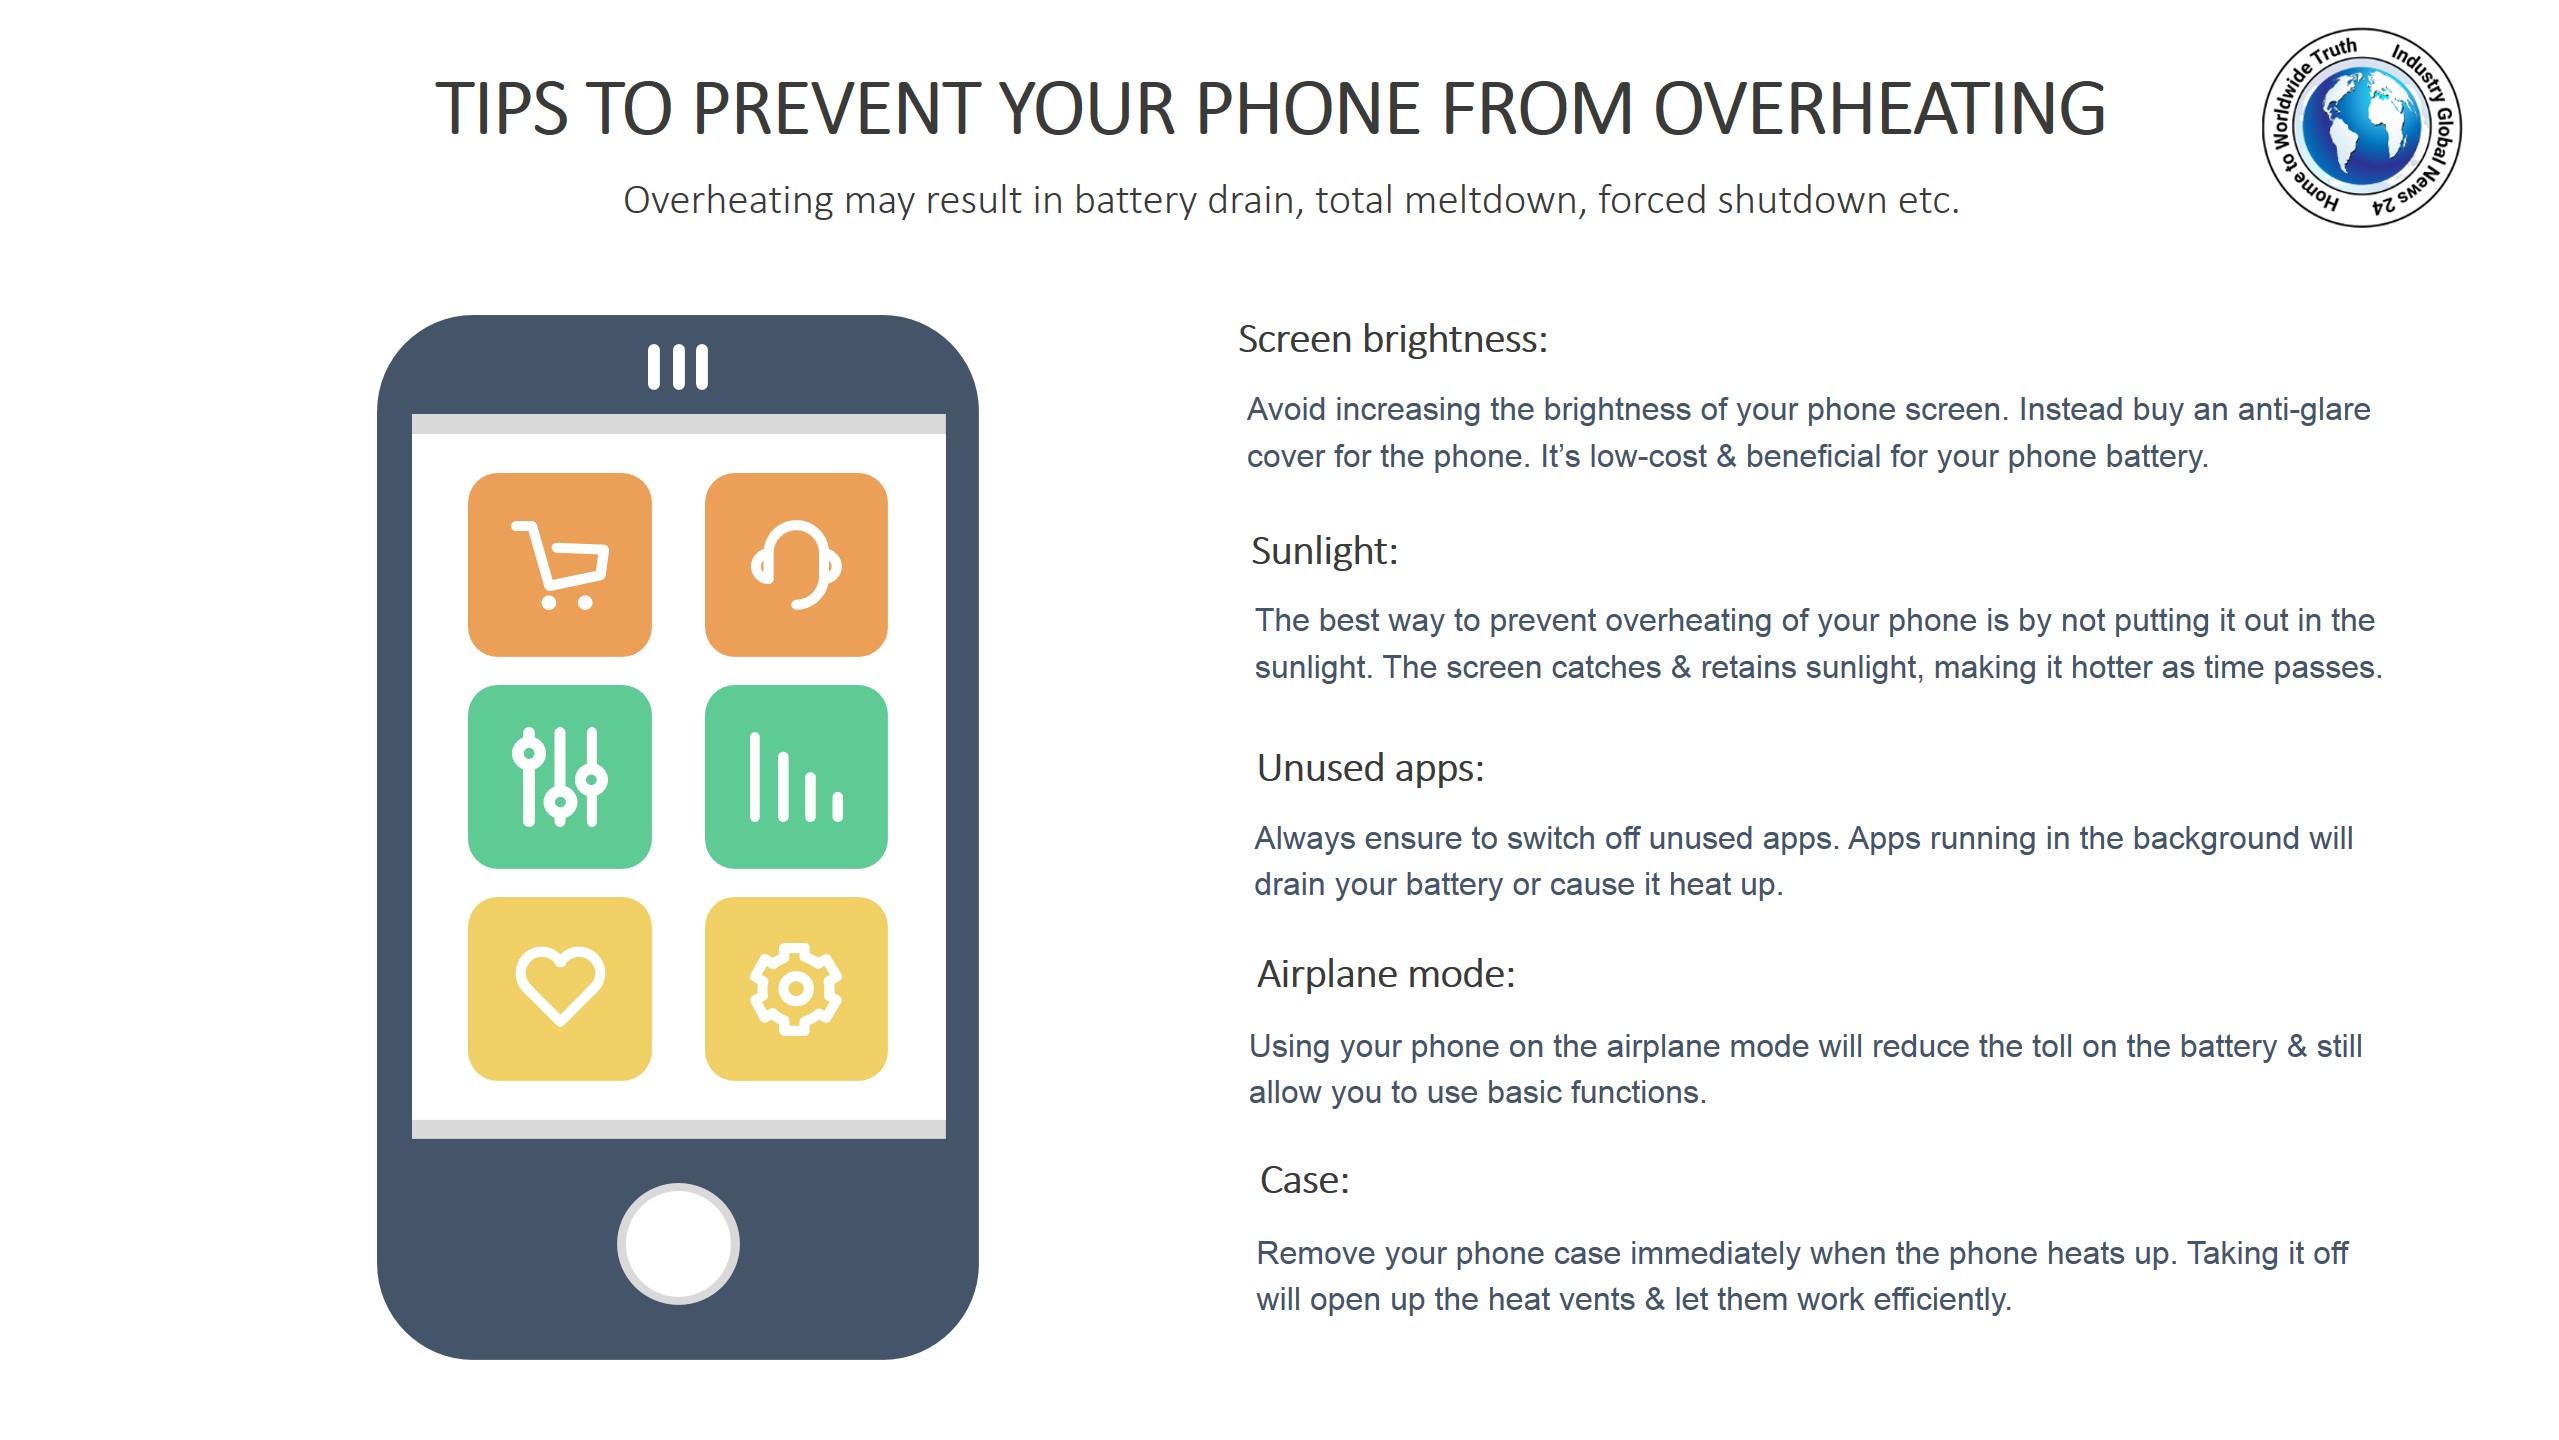 Tips to prevent your phone from overheating